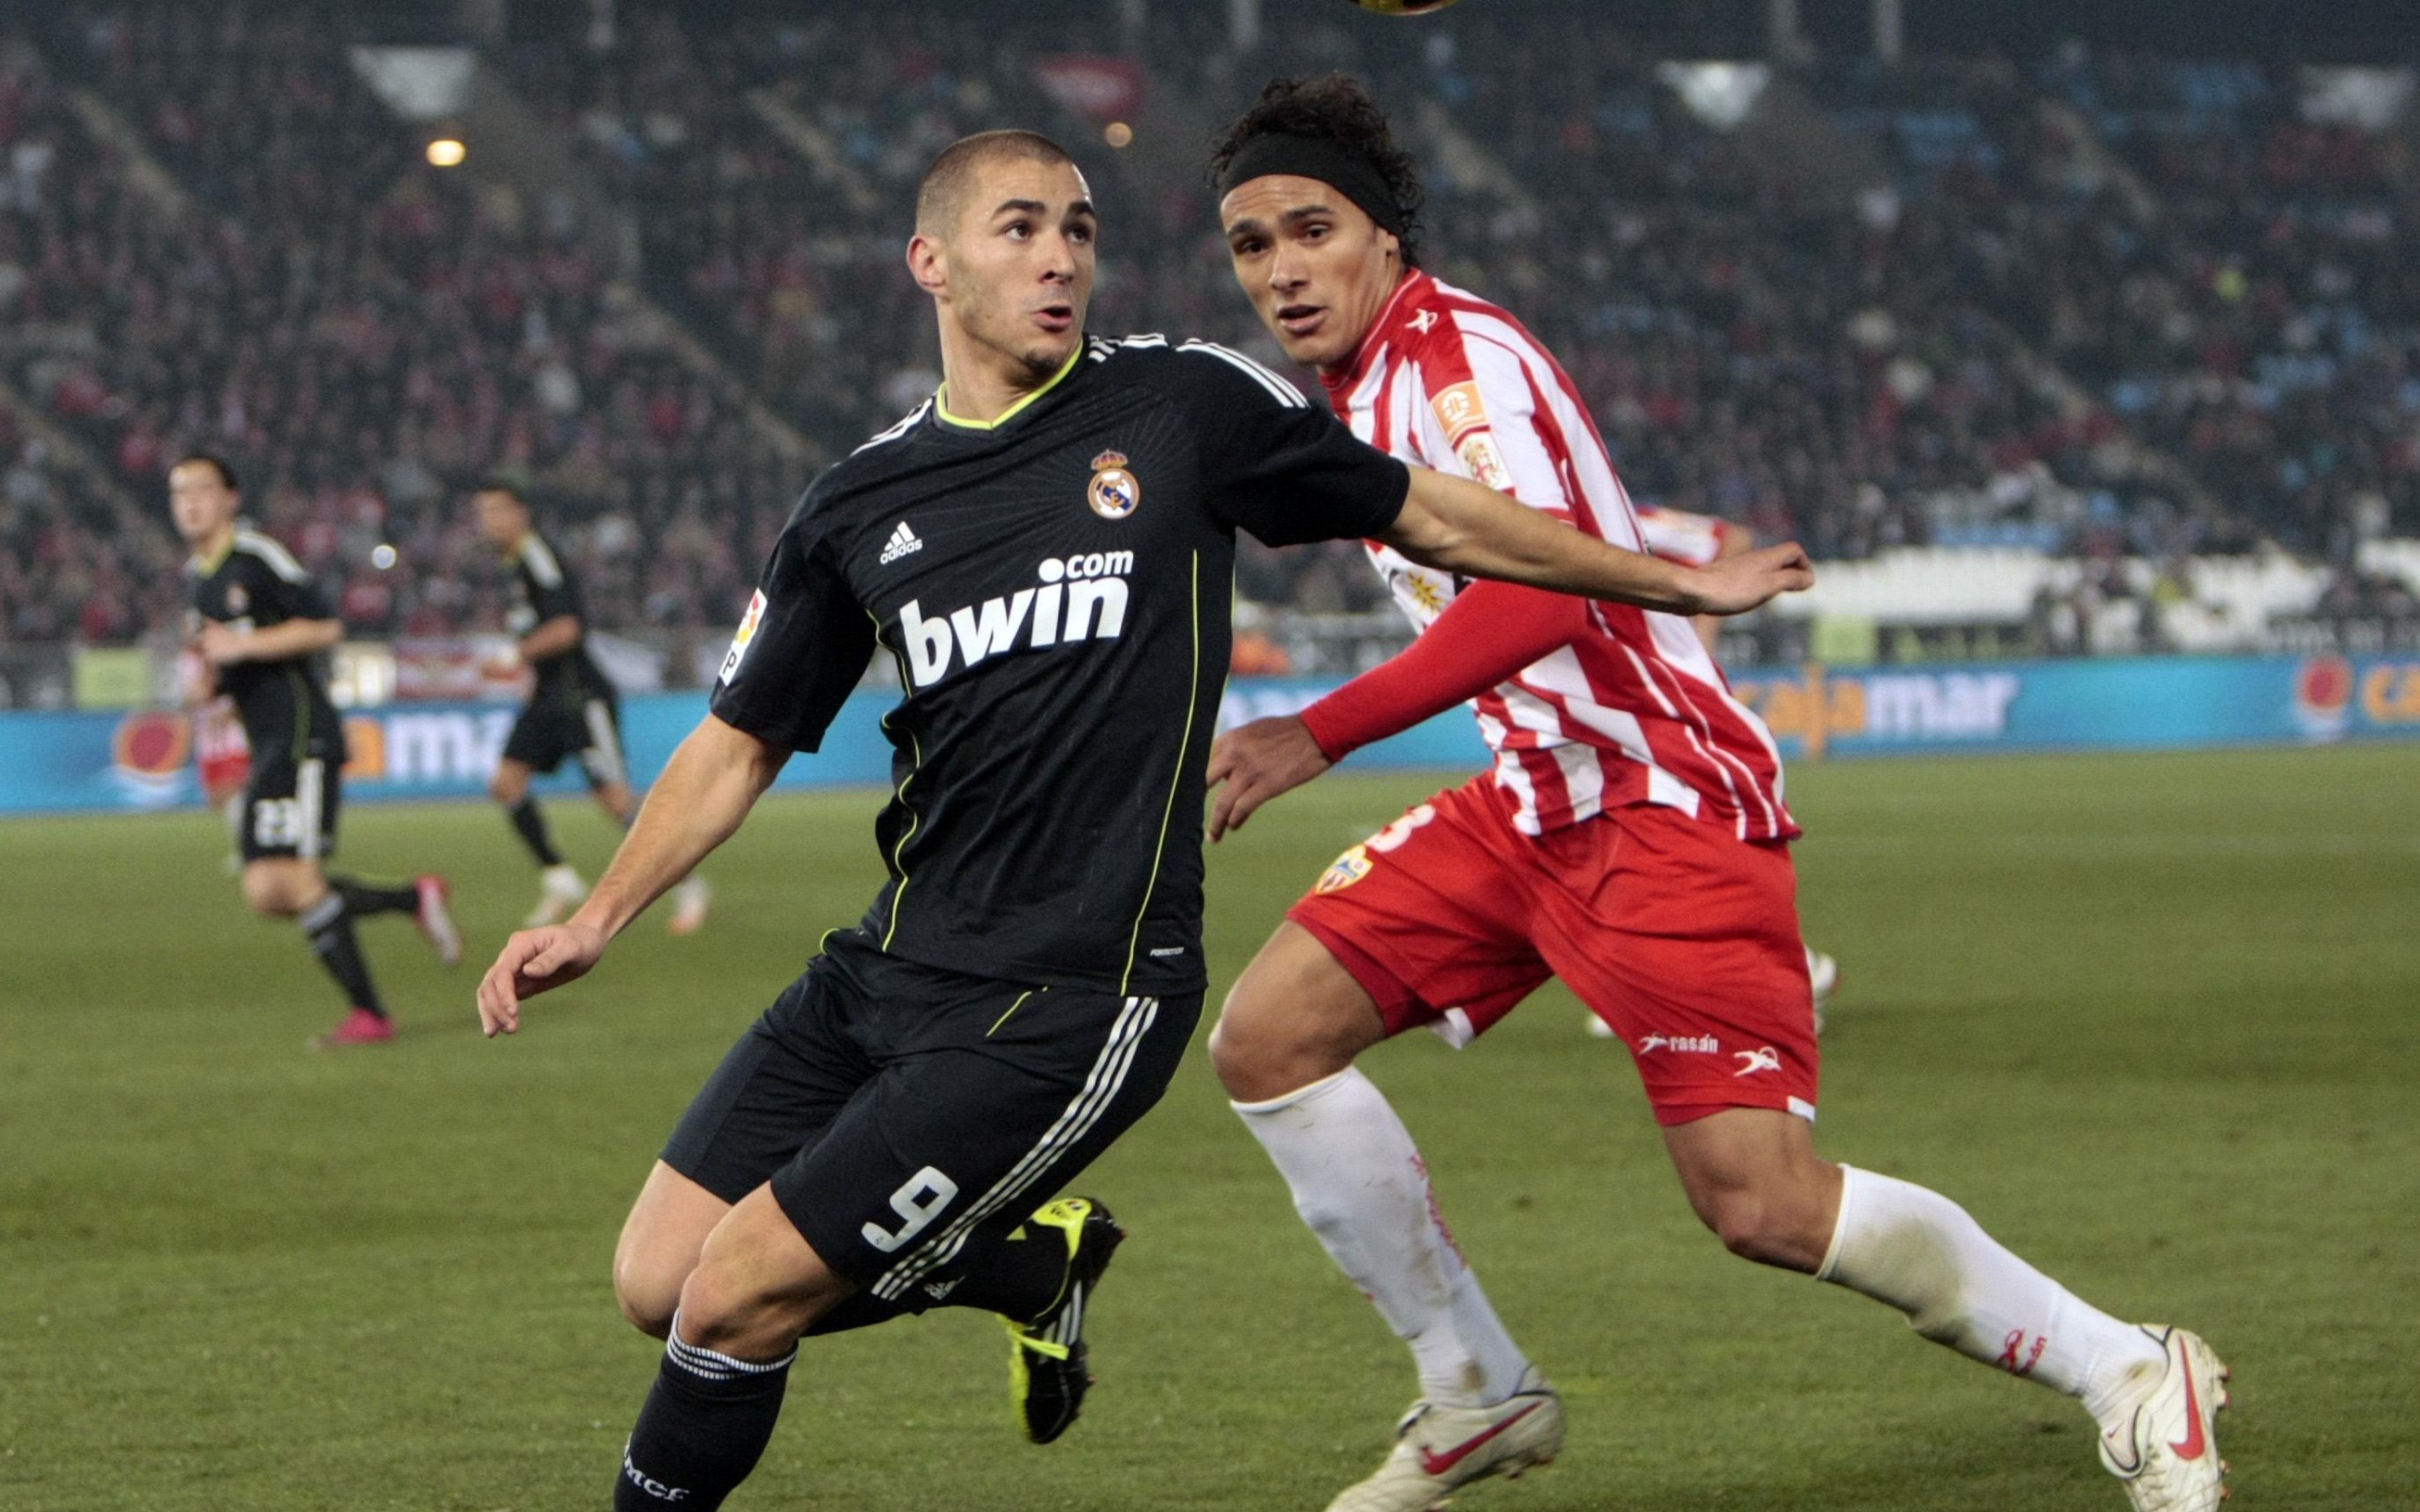 The forward of Real Madrid Karim Benzema is fighting for the ball